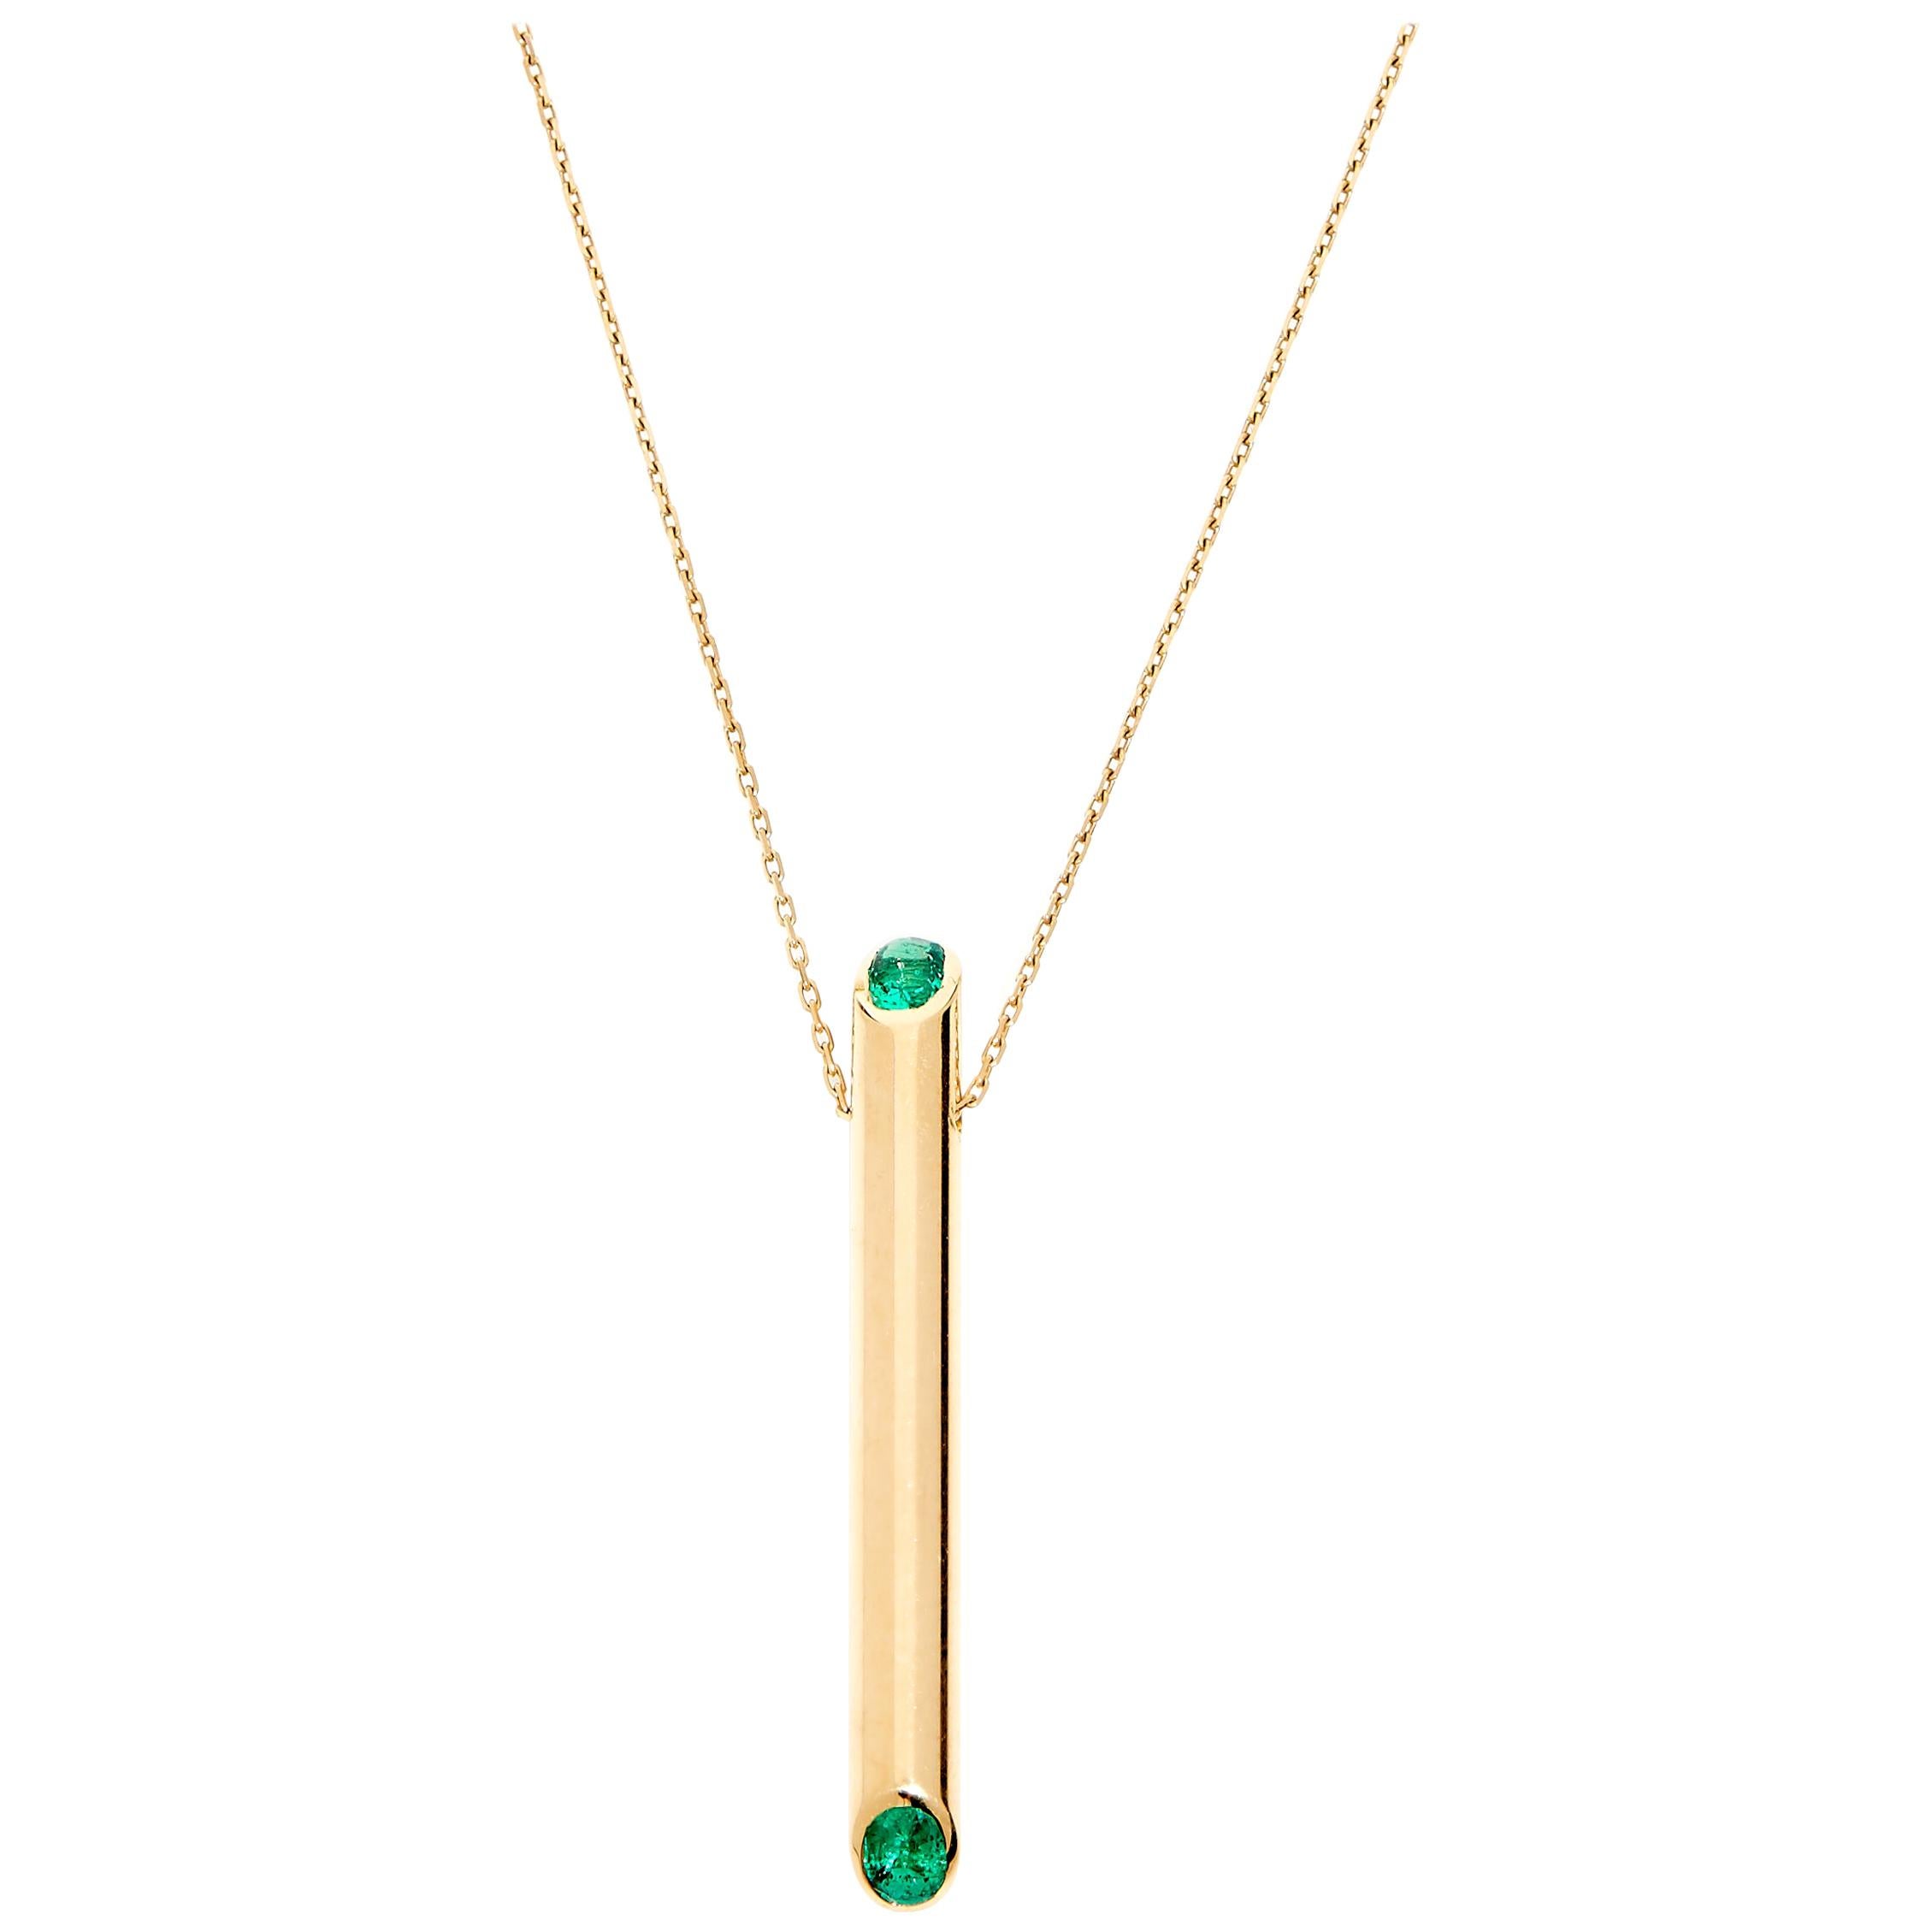 Les Grandes Orgues, Neckless, Yellow Gold and Tourmaline, pendant  For Sale